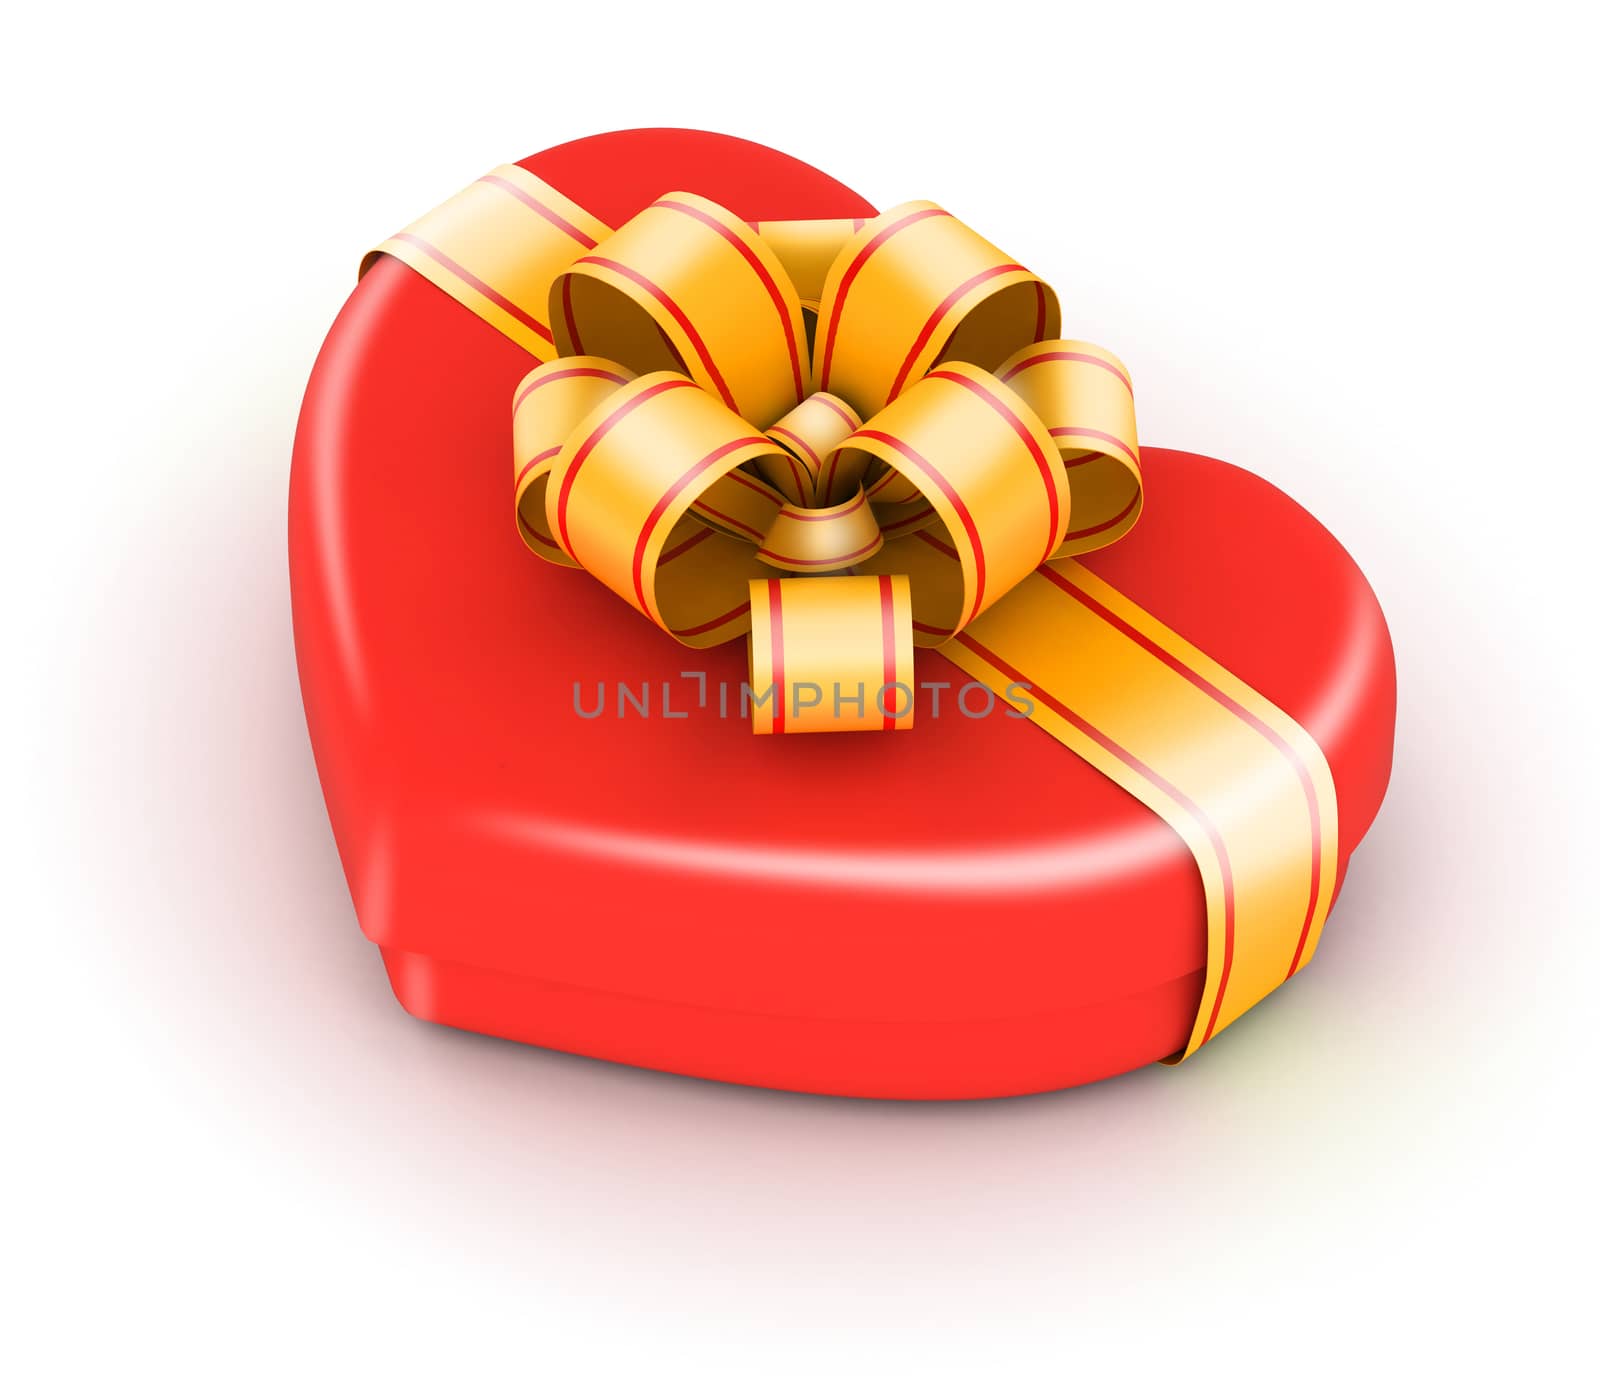 Red gift box with gold by iunewind